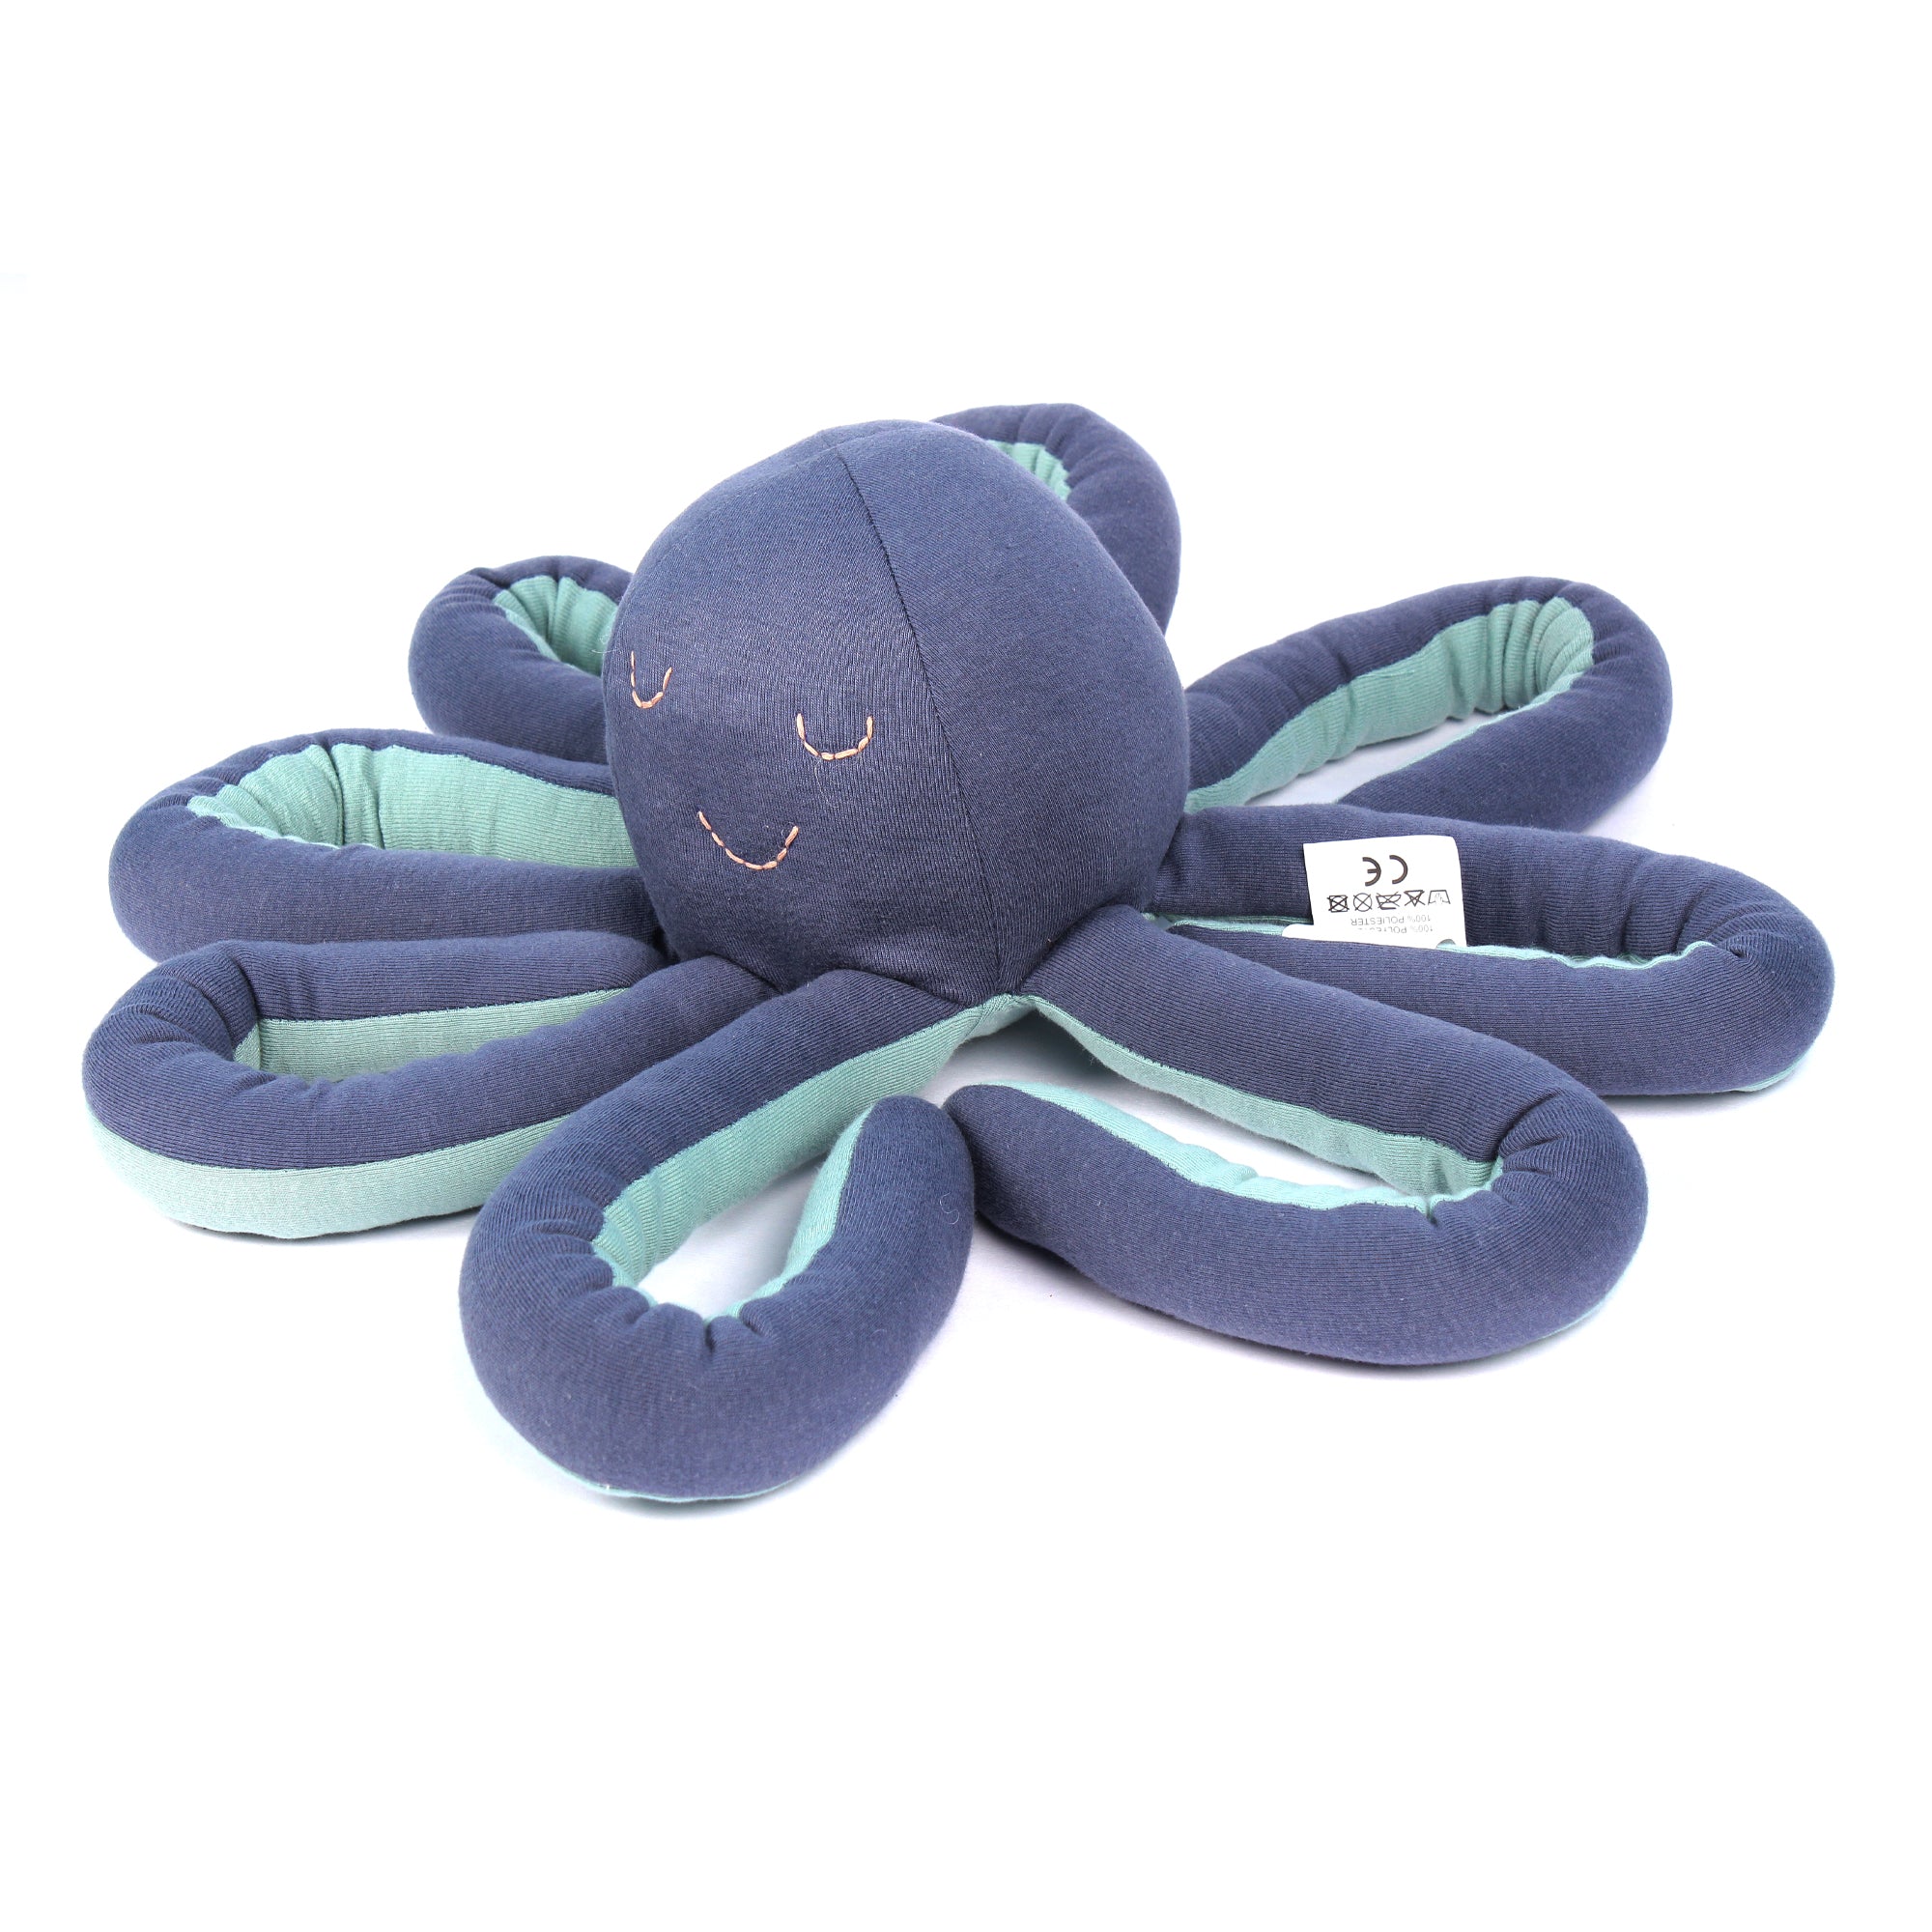 Octopus Stuffed Animal Baby Soft Toys Birthday Gifts for Kids (19 inches) (Blue Octopus)